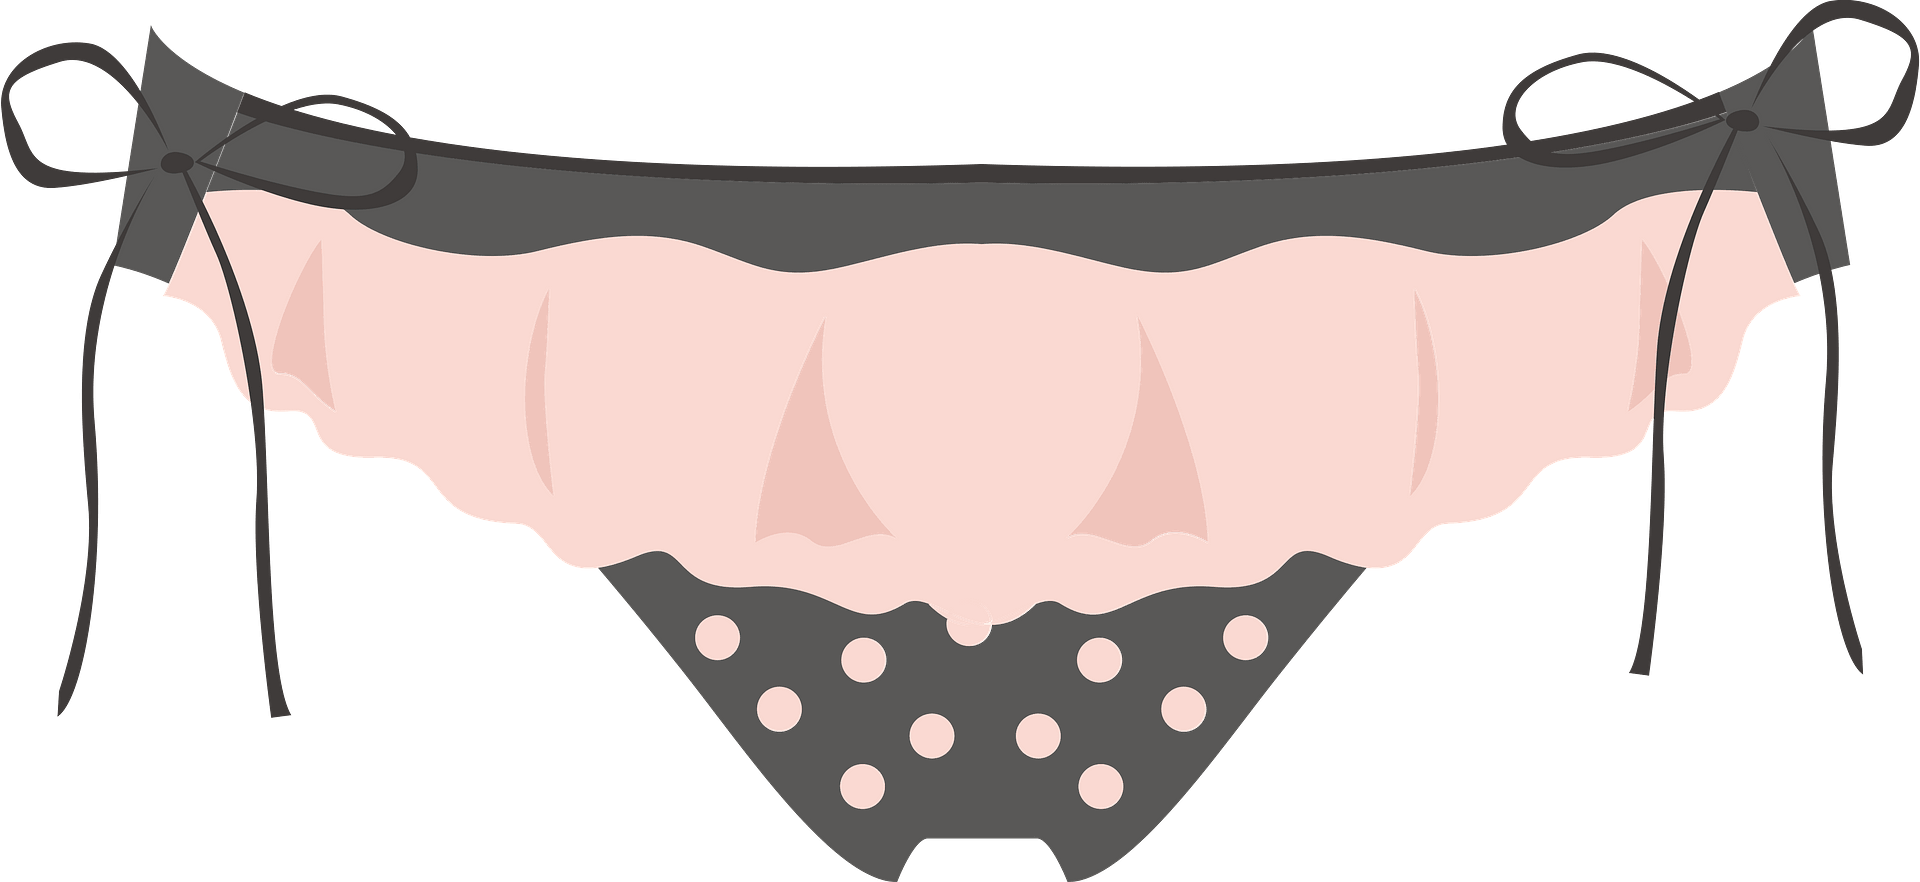 Lace Panties Stock Illustrations, Cliparts and Royalty Free Lace